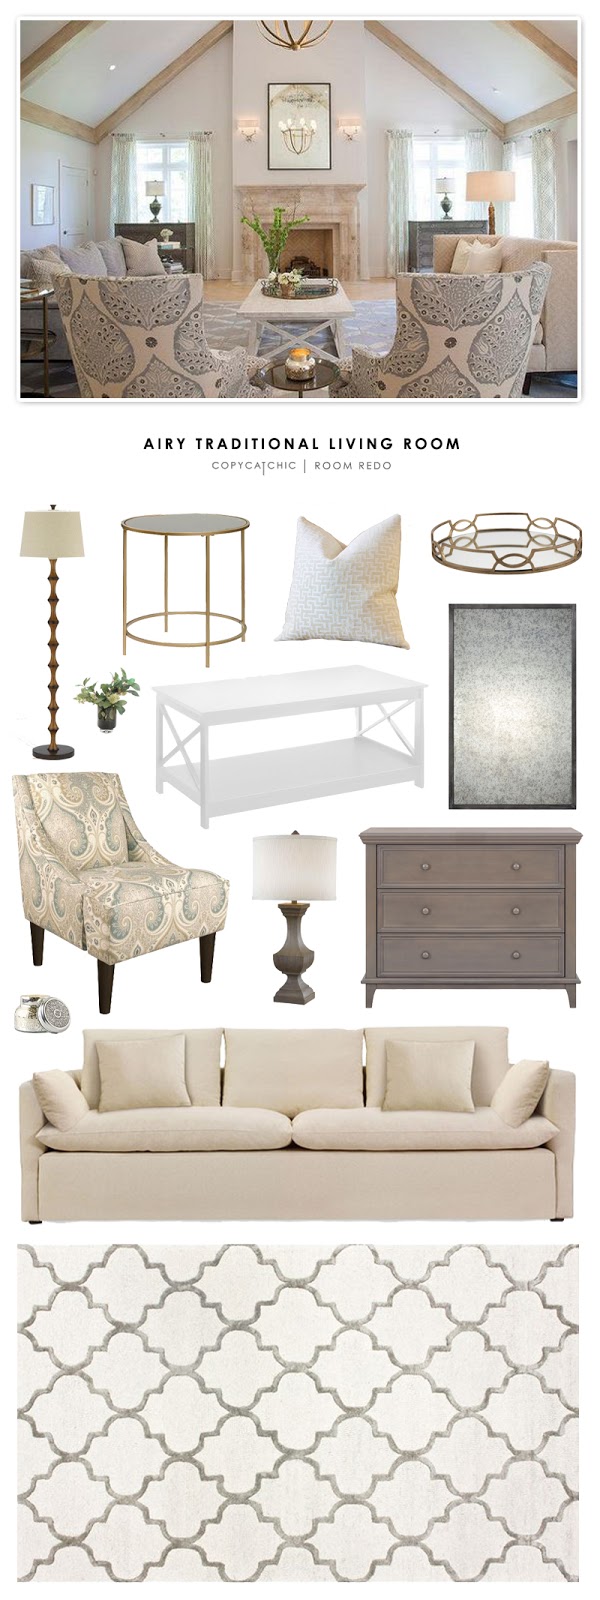 Copy Cat Chic Room Redo | Airy Traditional Living Room ...